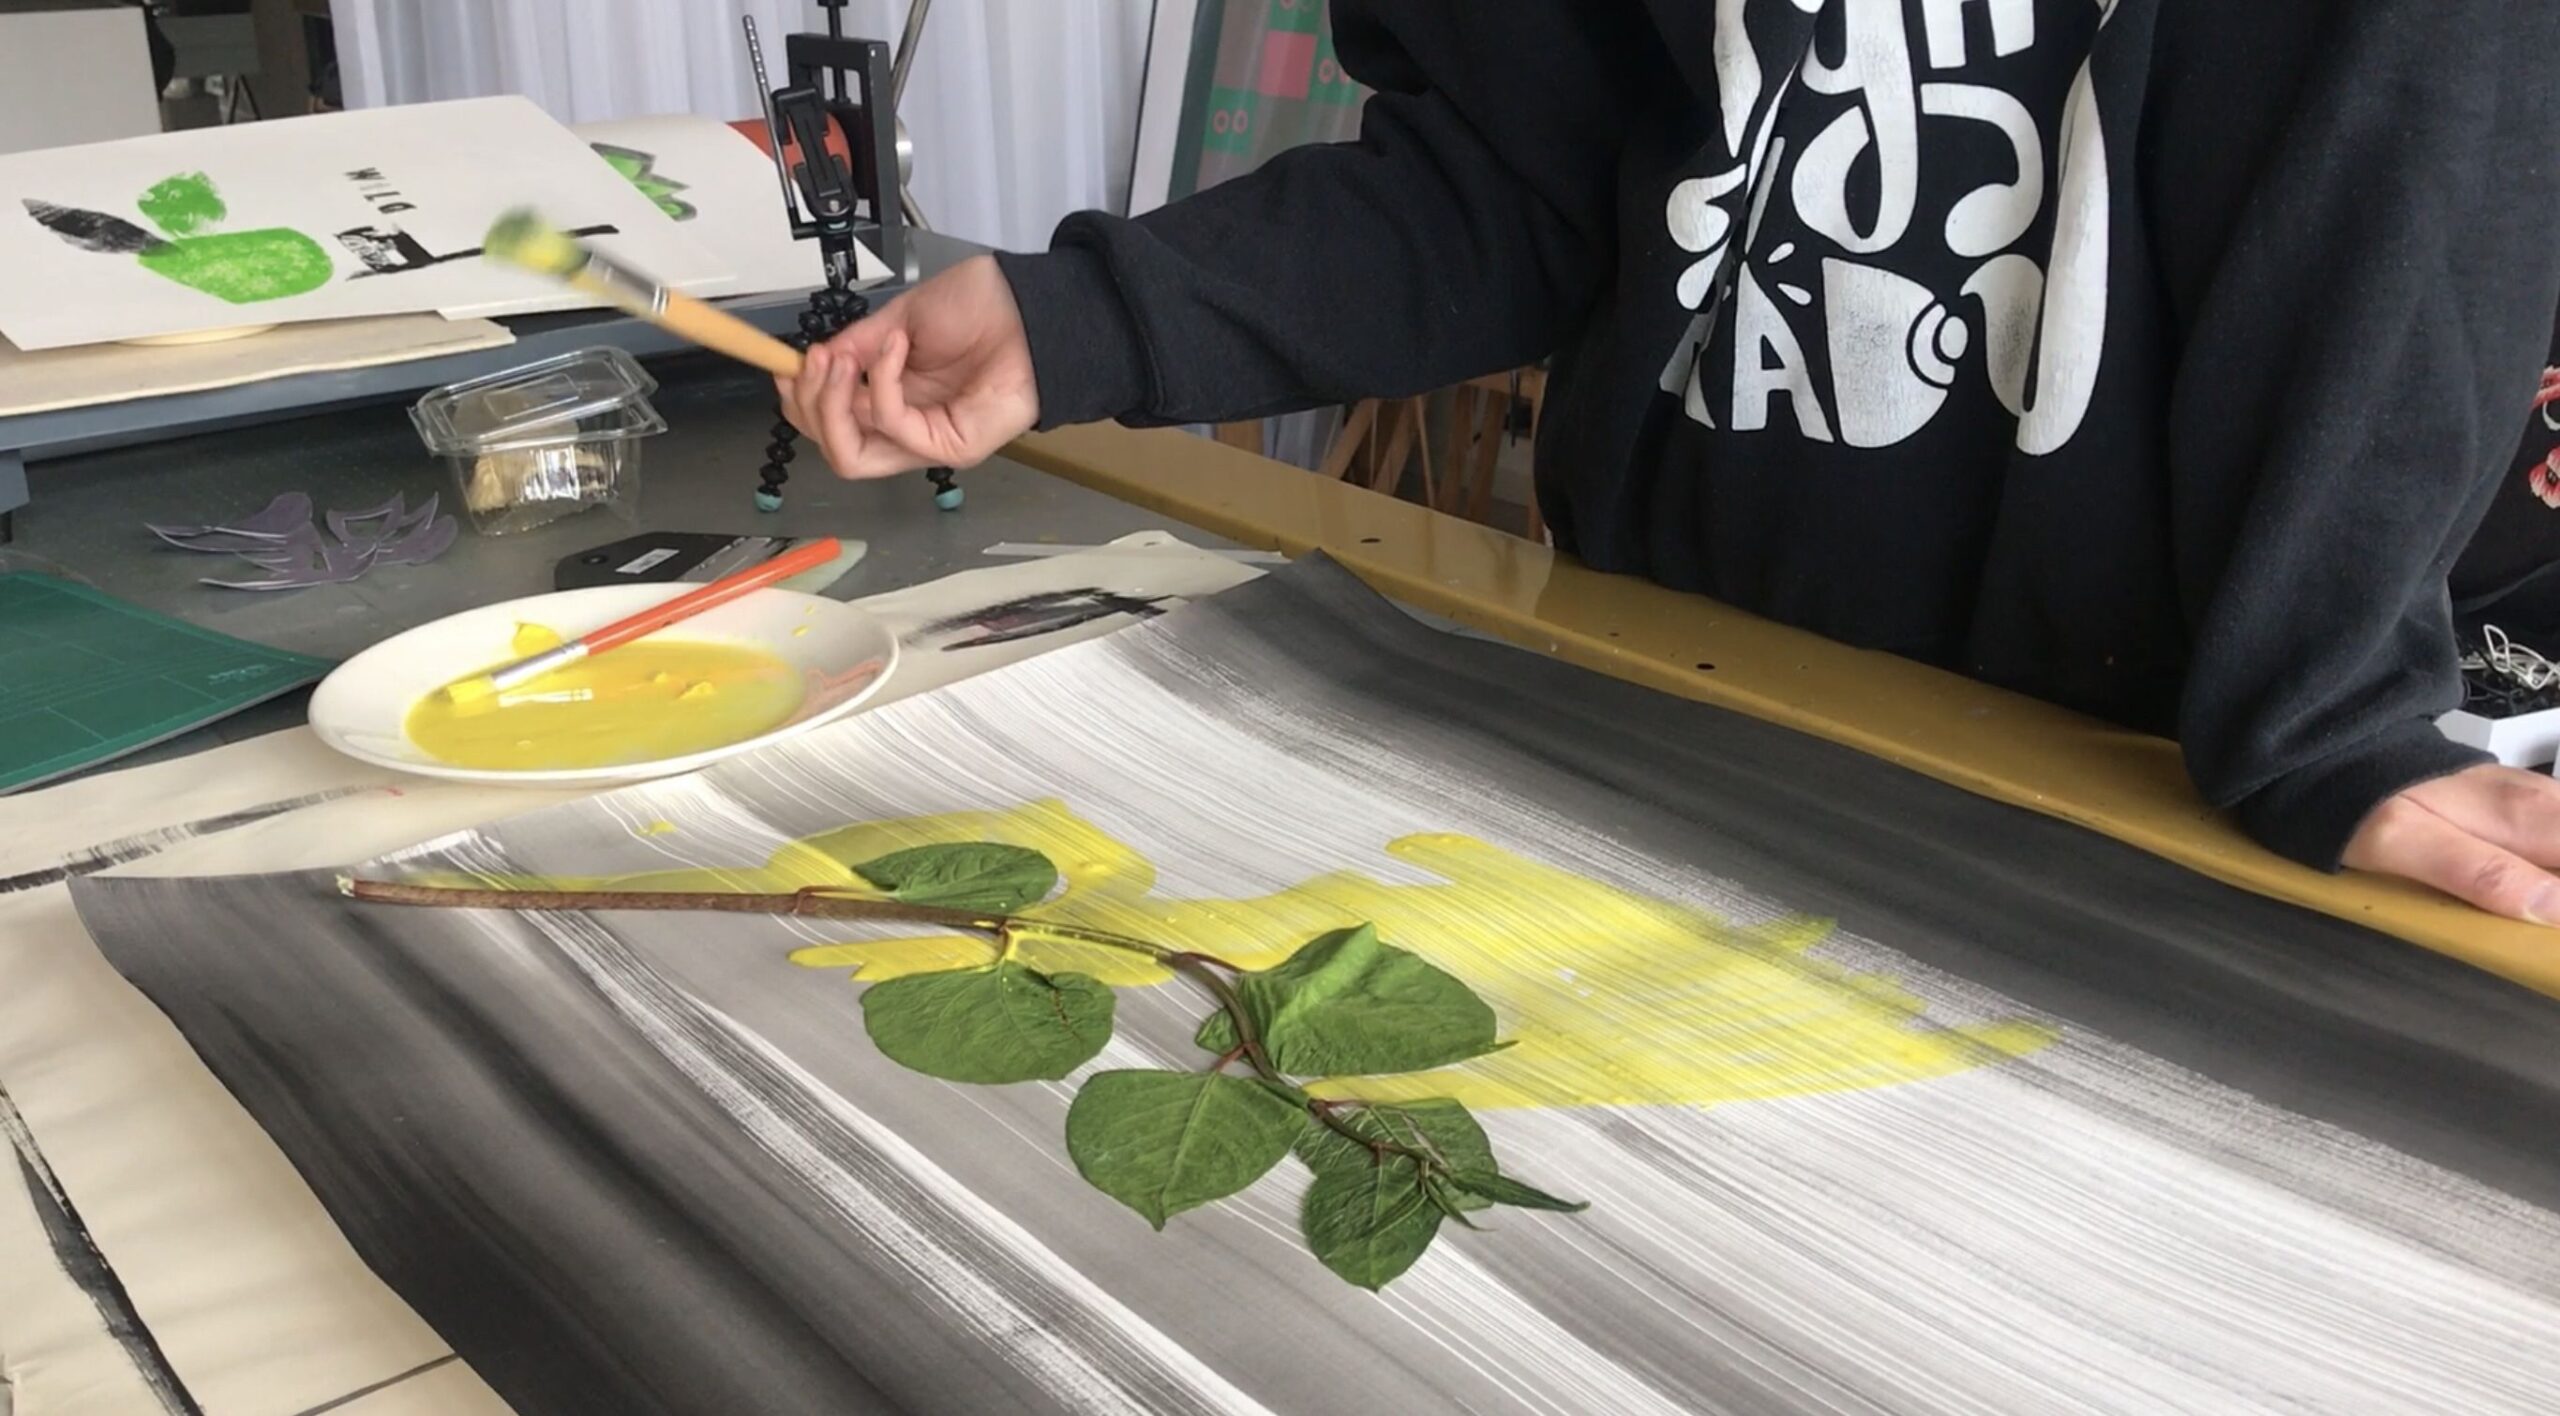 The bottom torso of a person can be seen at a table, they hold a paintbrush and our painting over some leaves onto paper